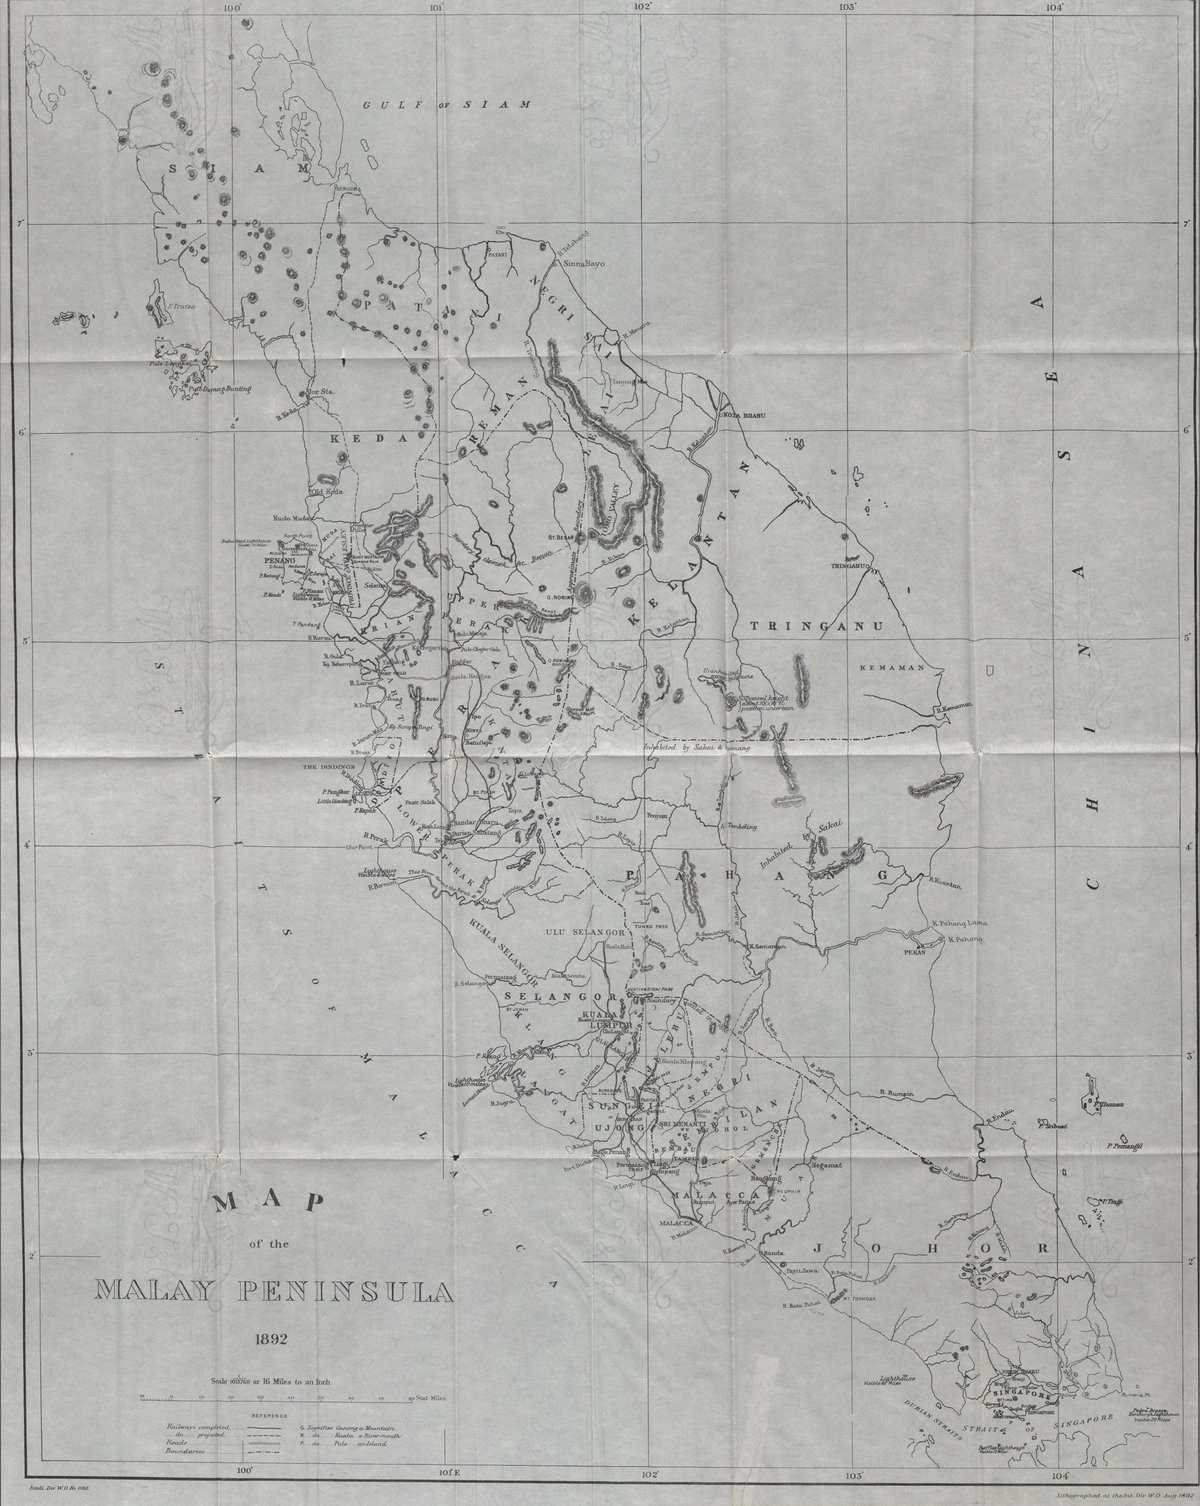 Map of Malayan Penisula, about which Ngiam Tong-Fatt was writing.